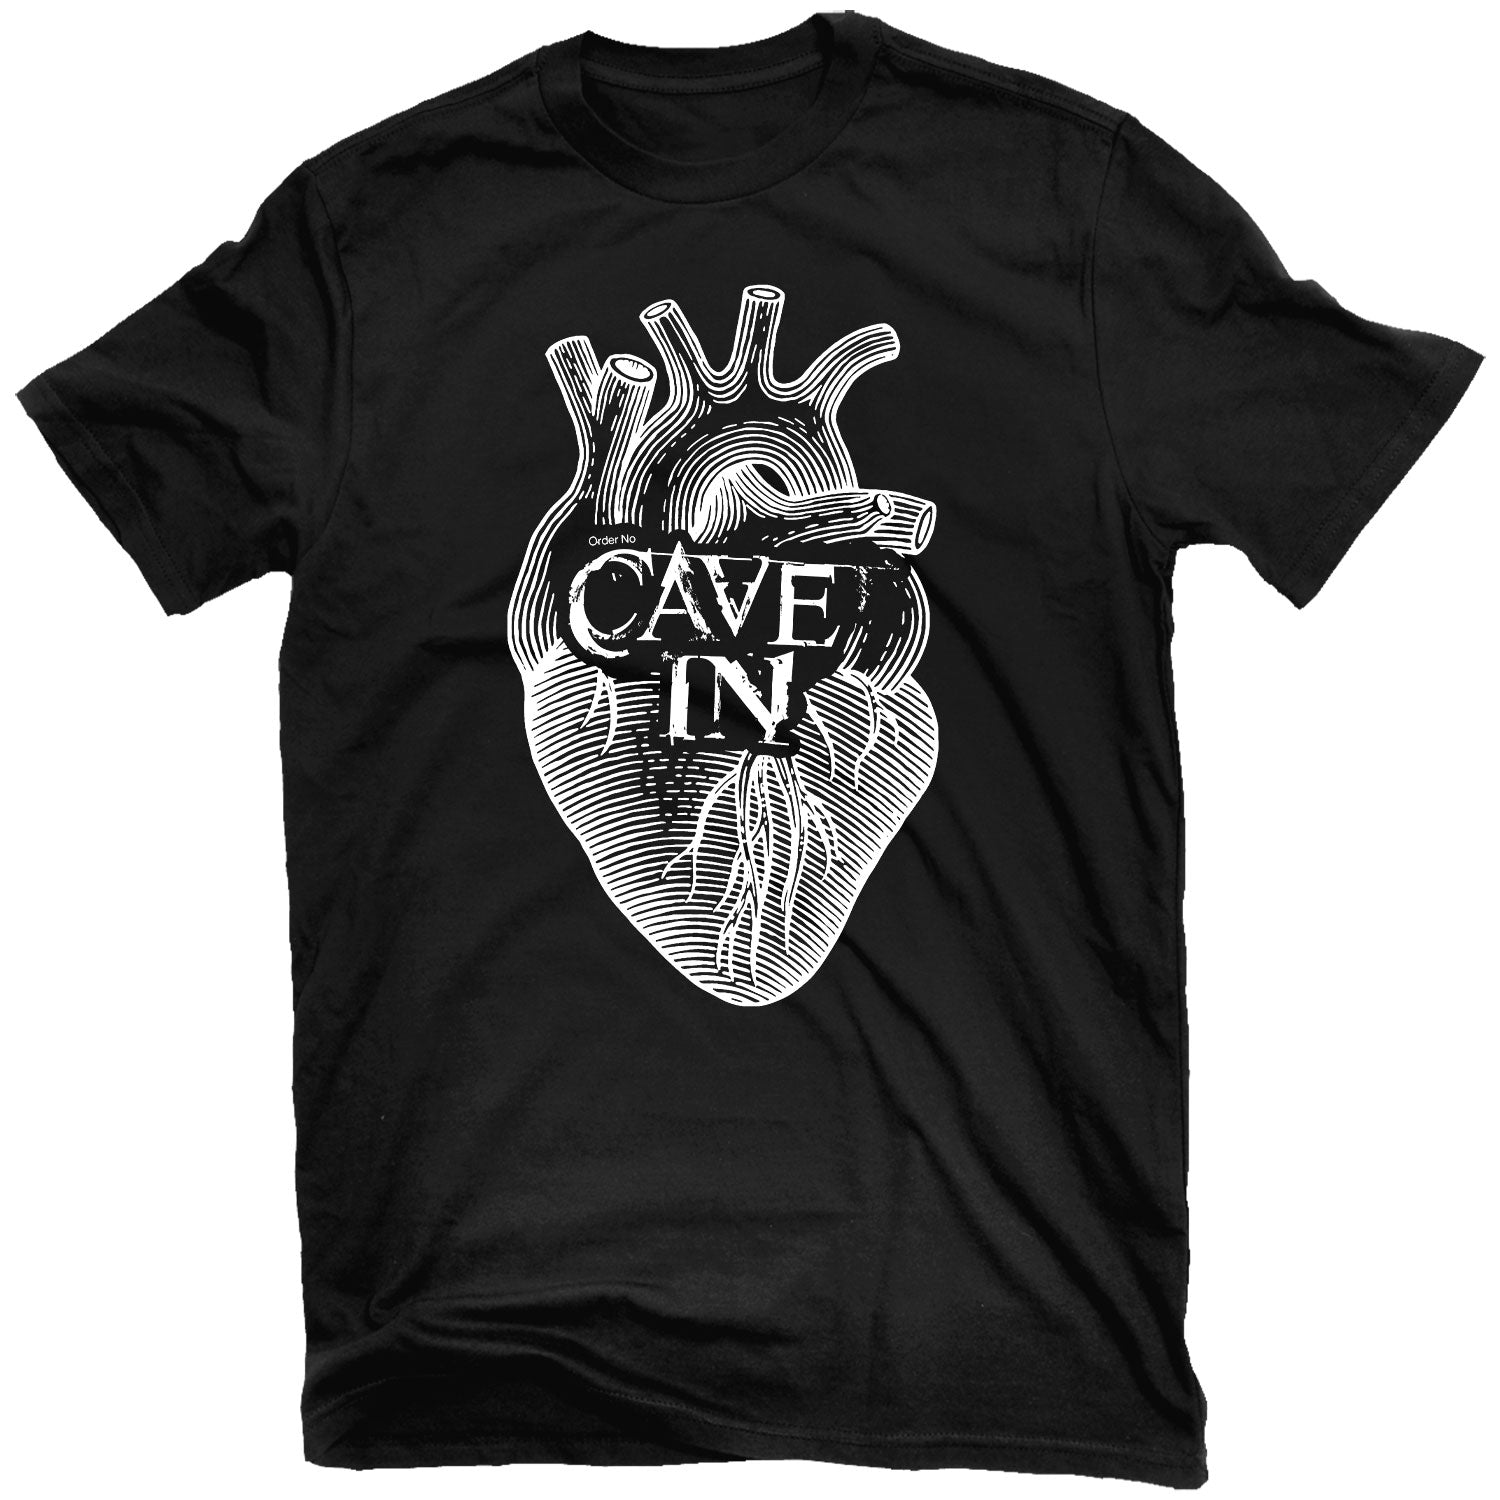 Cave In "Heart" T-Shirt